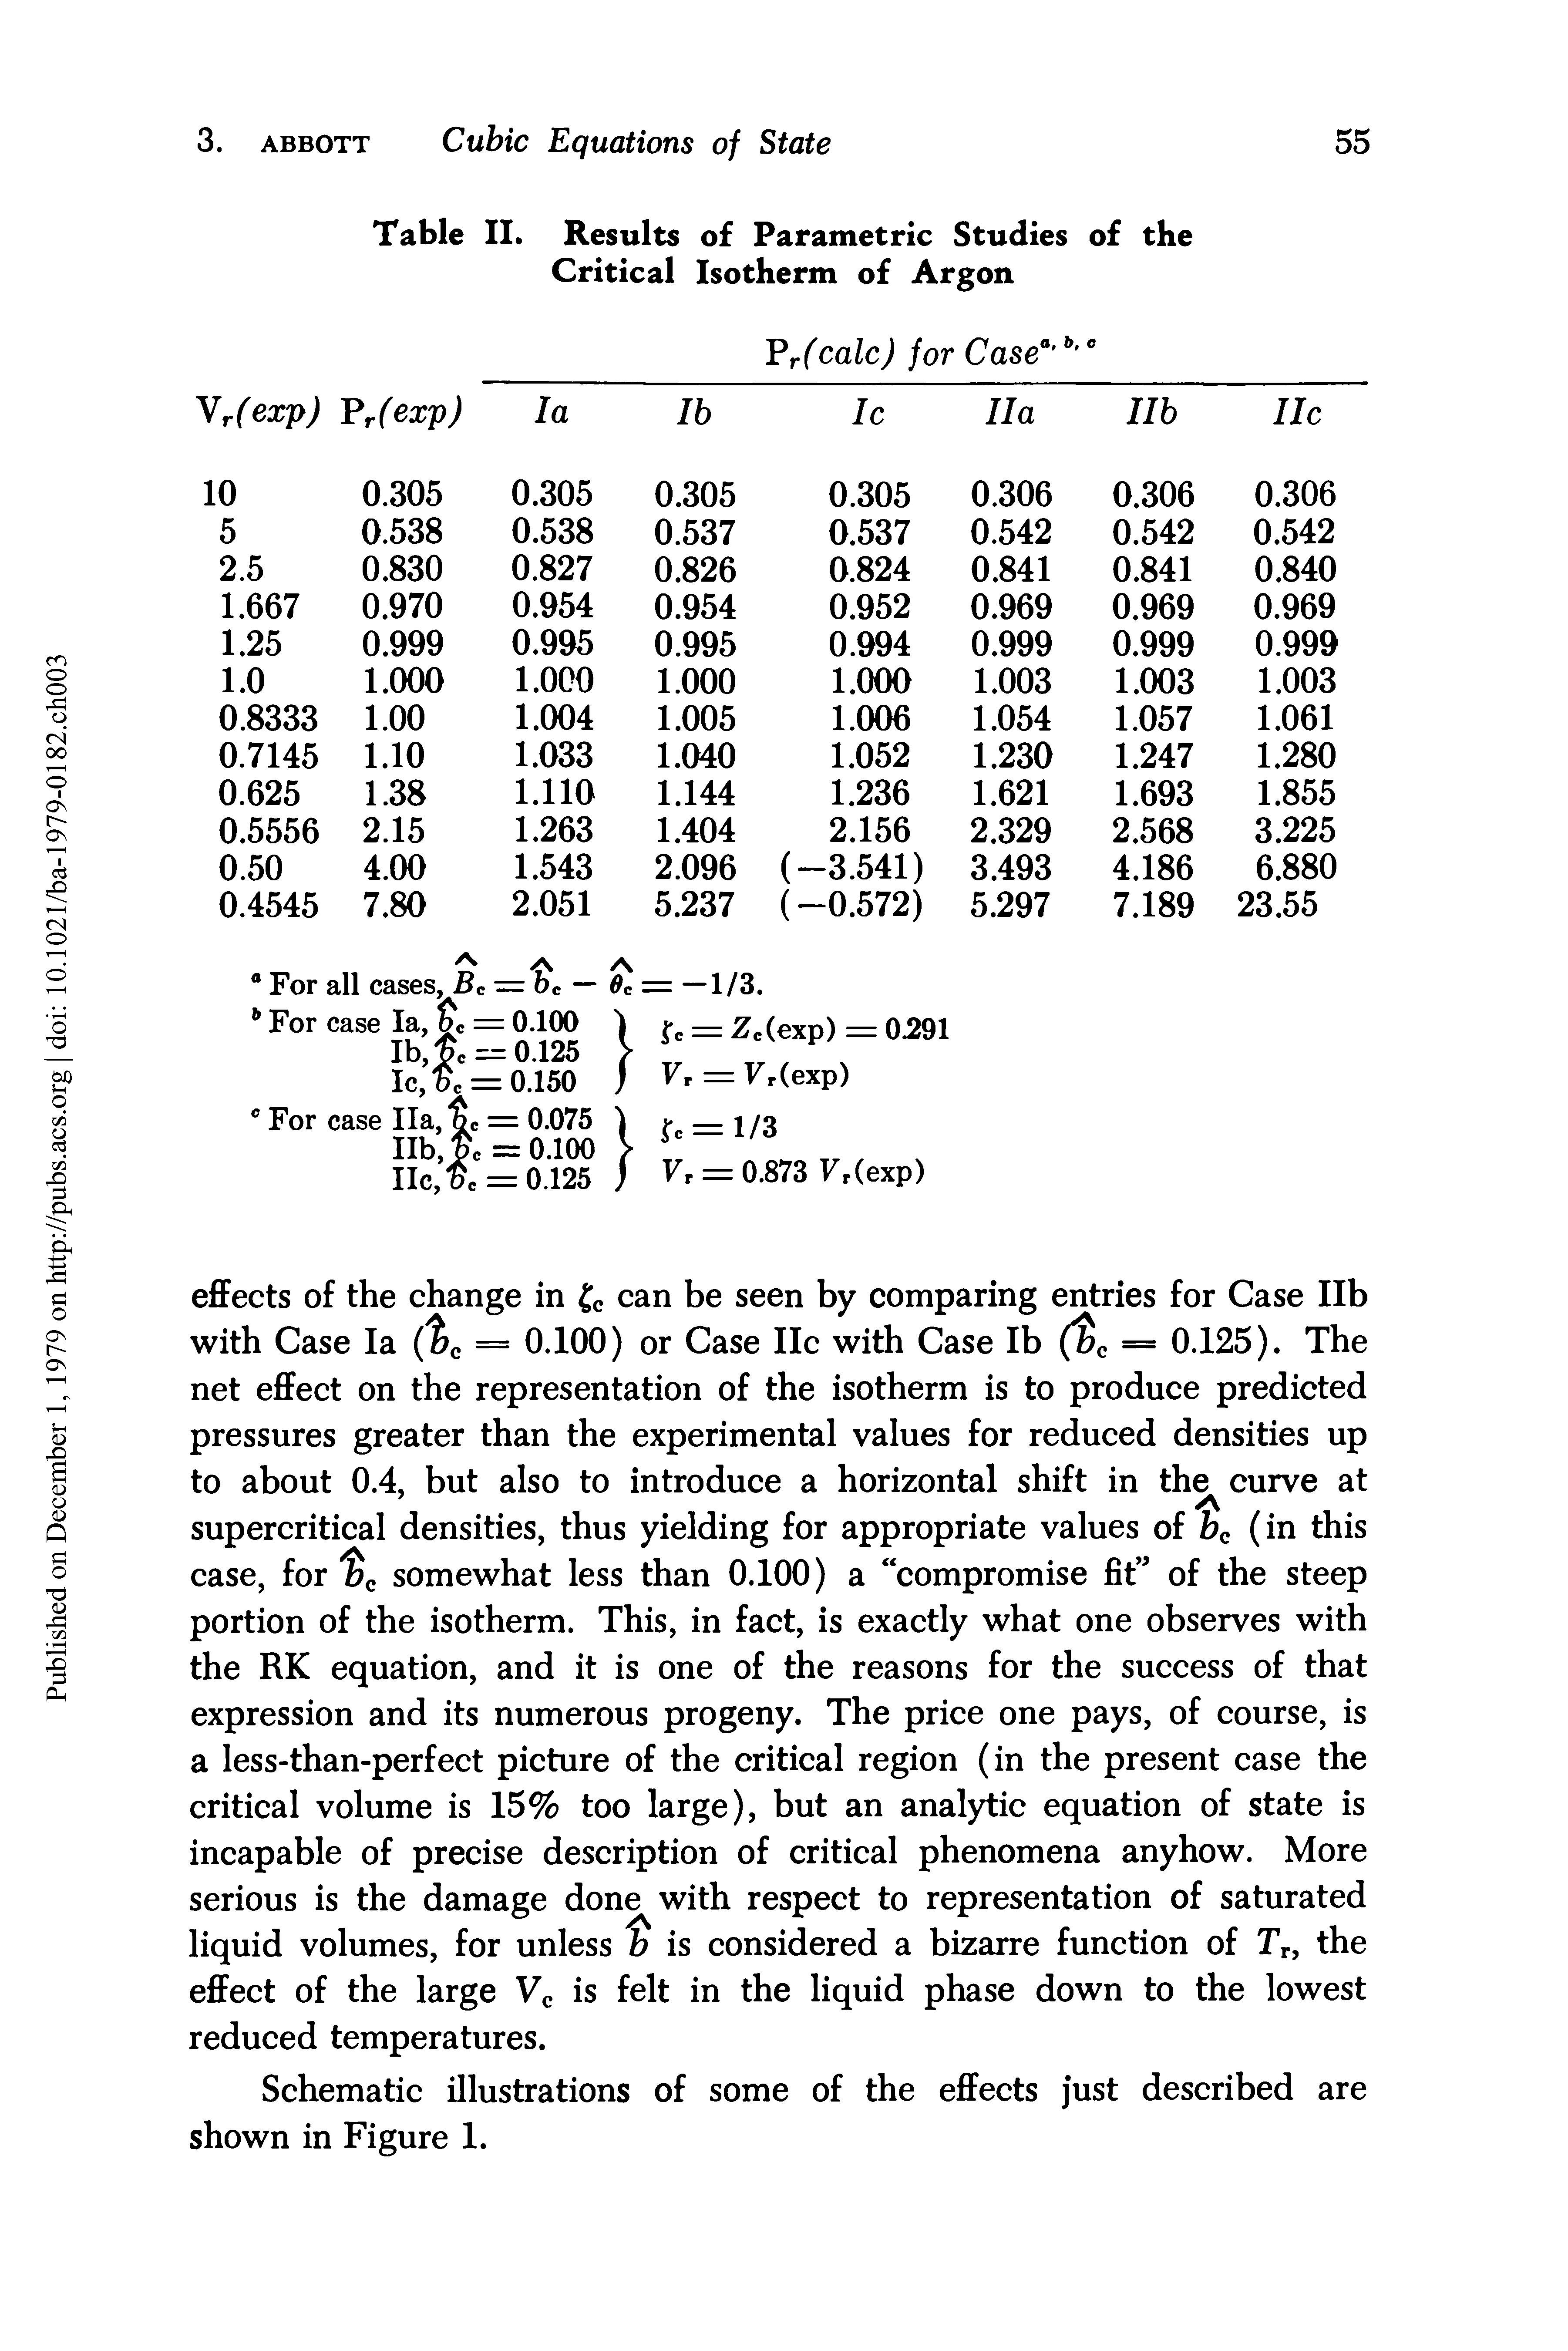 Table II. Results of Parametric Studies of the Critical Isotherm of Argon...